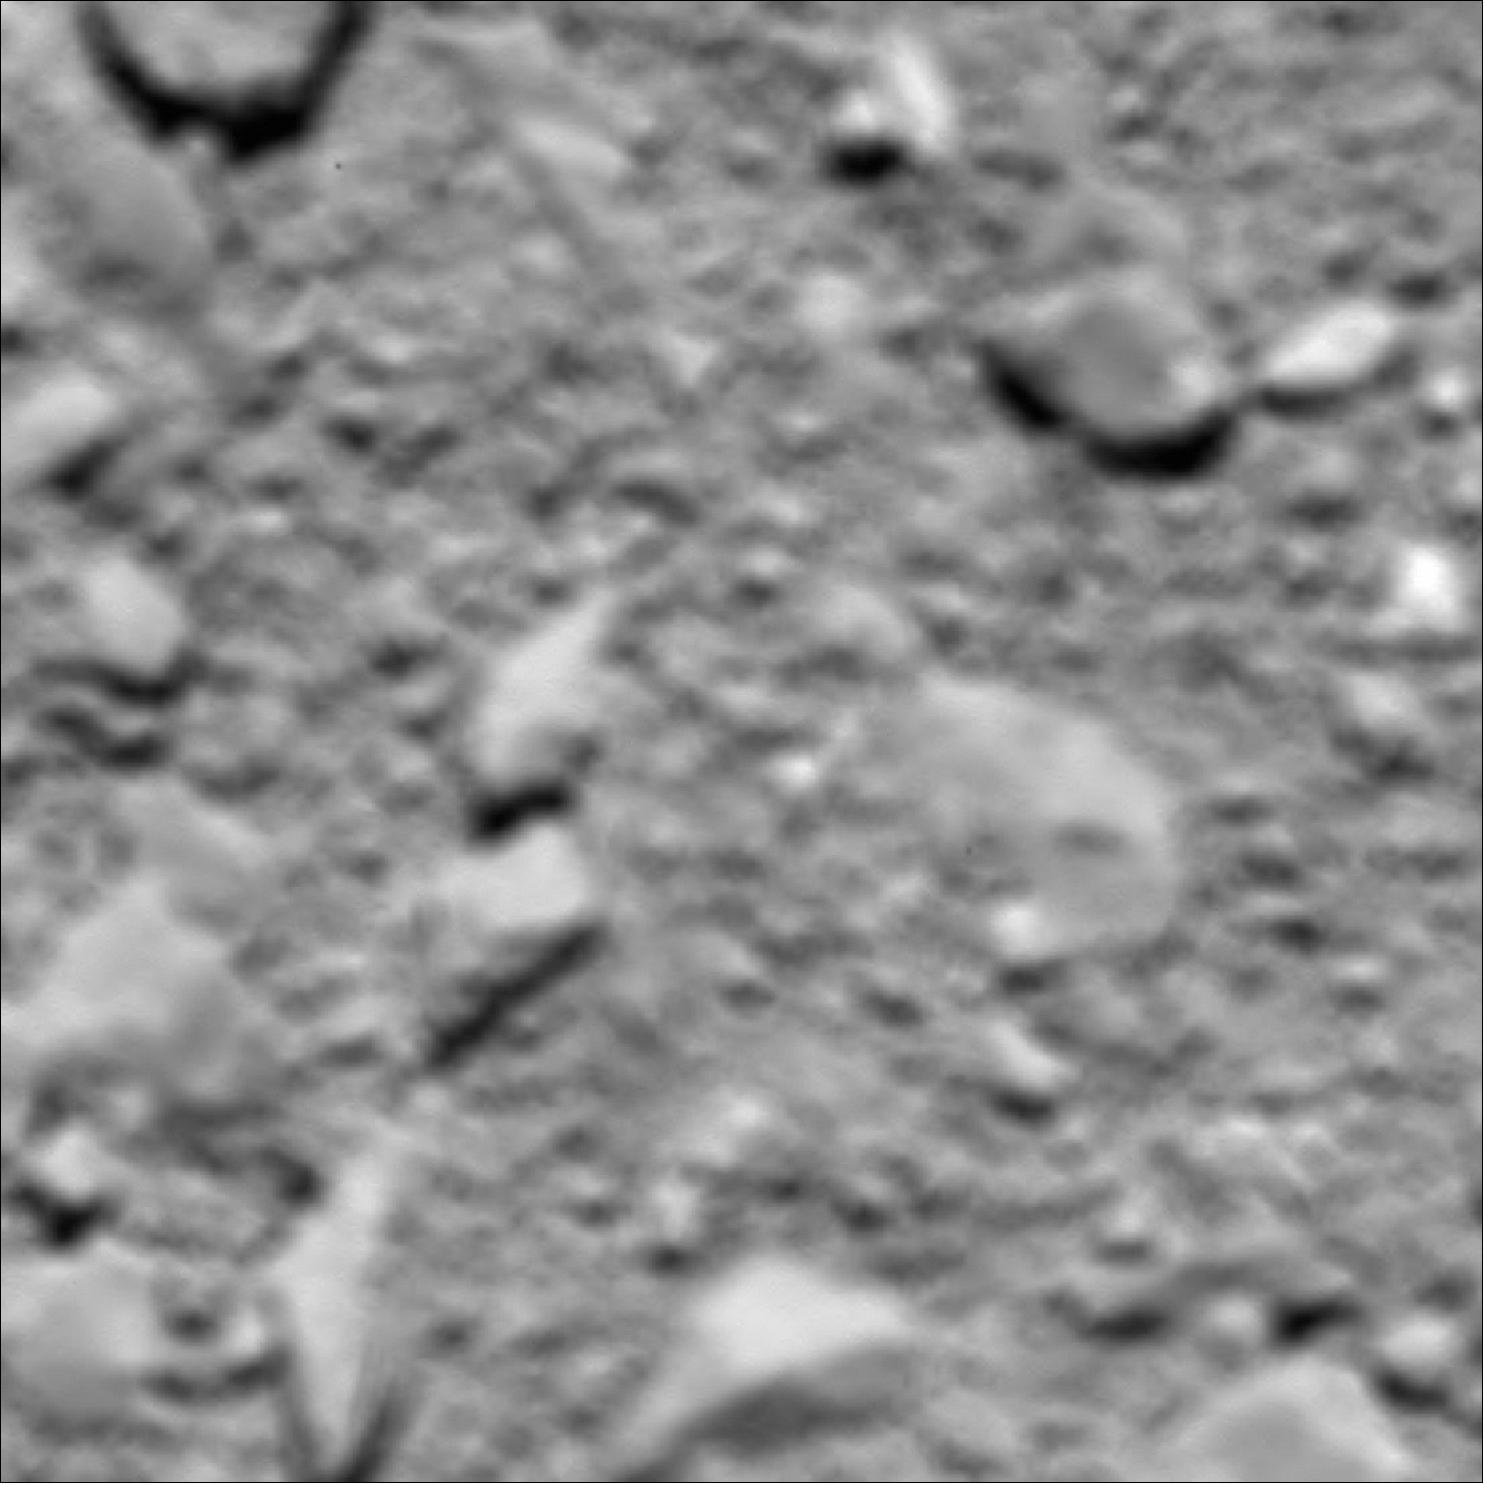 Figure 79: A final image from Rosetta, shortly before it made a controlled impact onto Comet 67P/Churyumov–Gerasimenko on 30 September 2016, was reconstructed from residual telemetry. The image has a scale of 2 mm/pixel and measures about 1 m across (image credit: ESA/Rosetta/MPS for OSIRIS Team MPS/UPD/LAM/IAA/SSO/INTA/UPM/DASP/IDA)